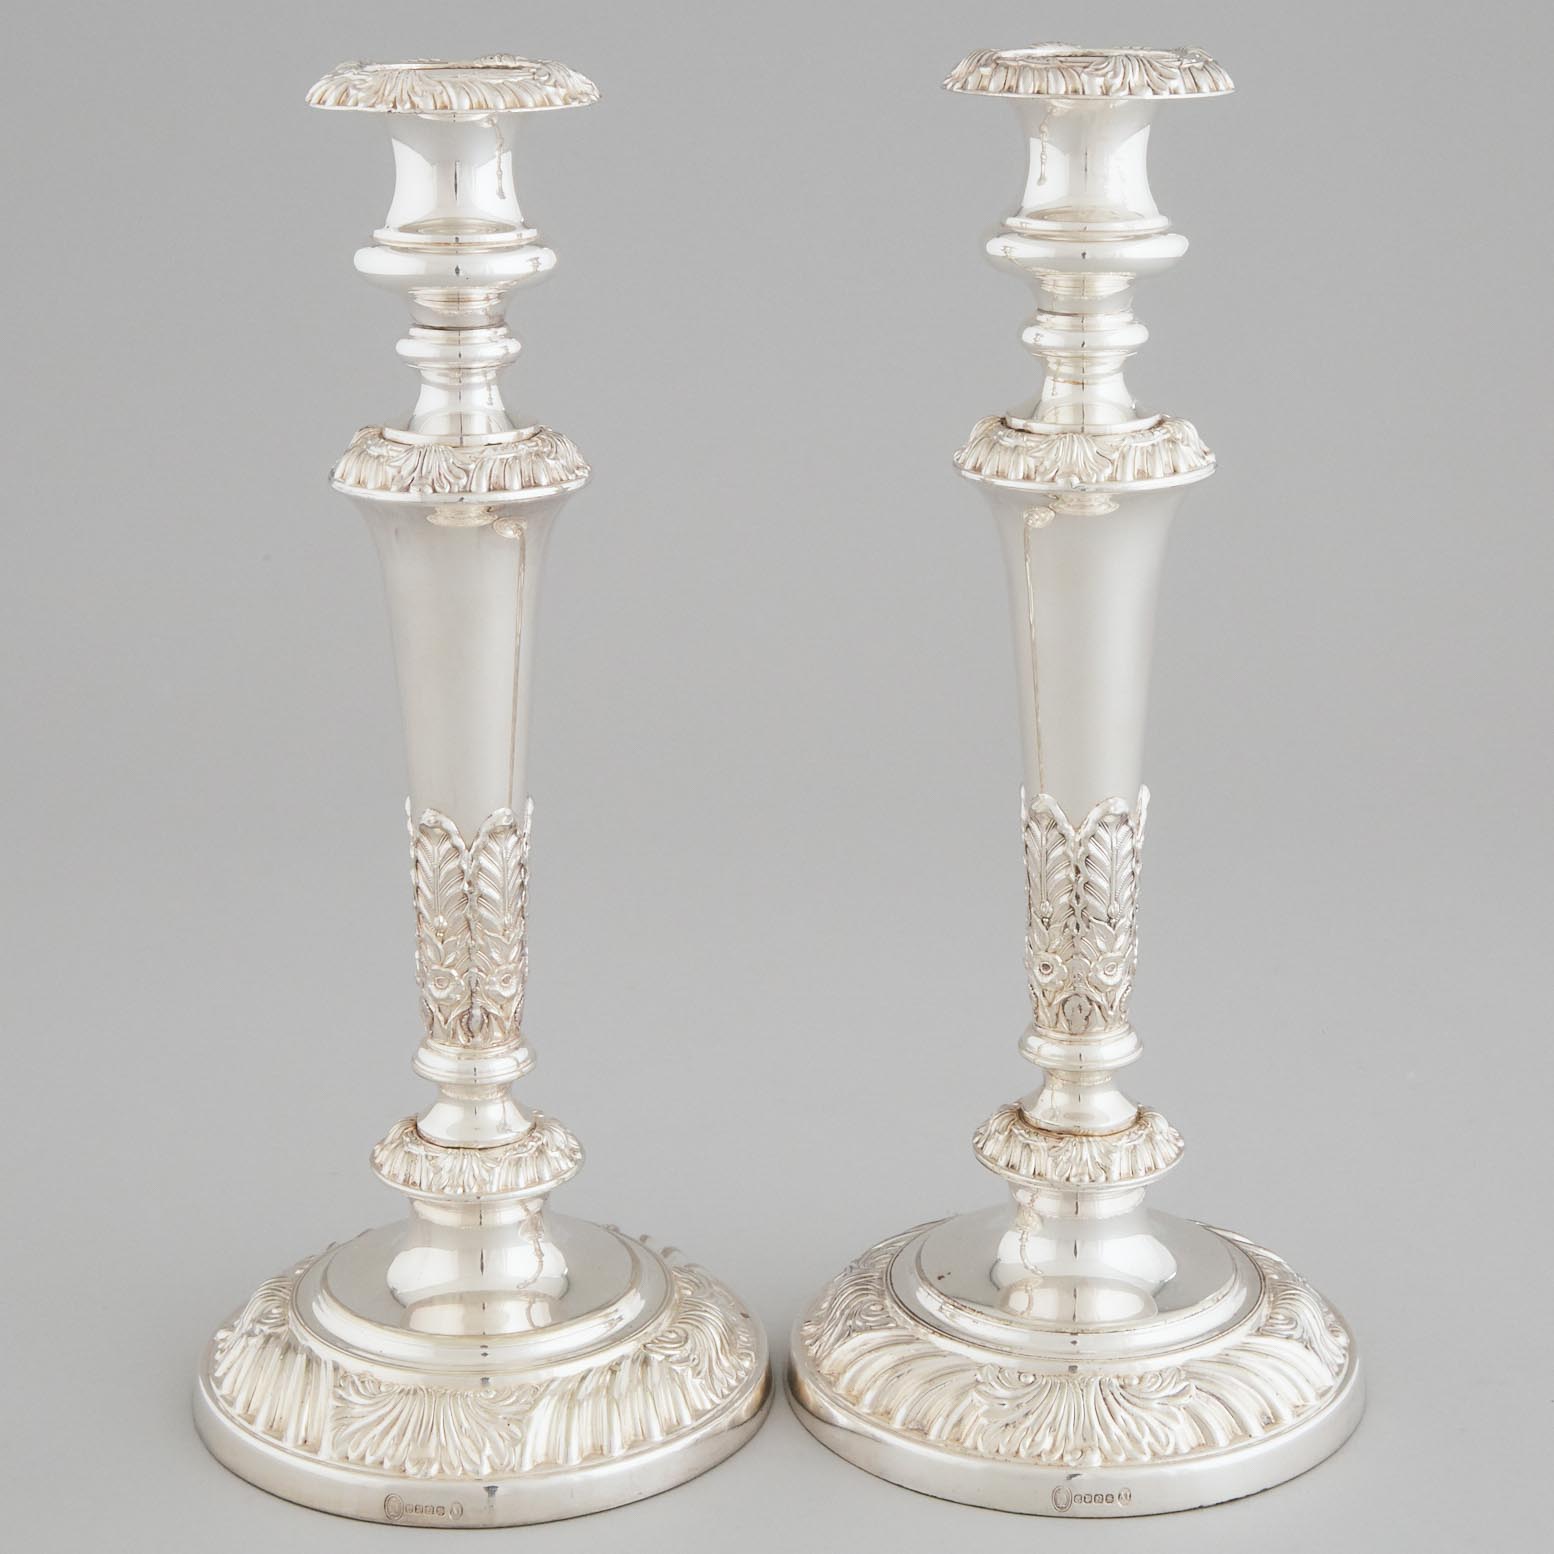 Pair of English Silver Plated Table Candlesticks, Ellis-Barker Silver Co., 20th century